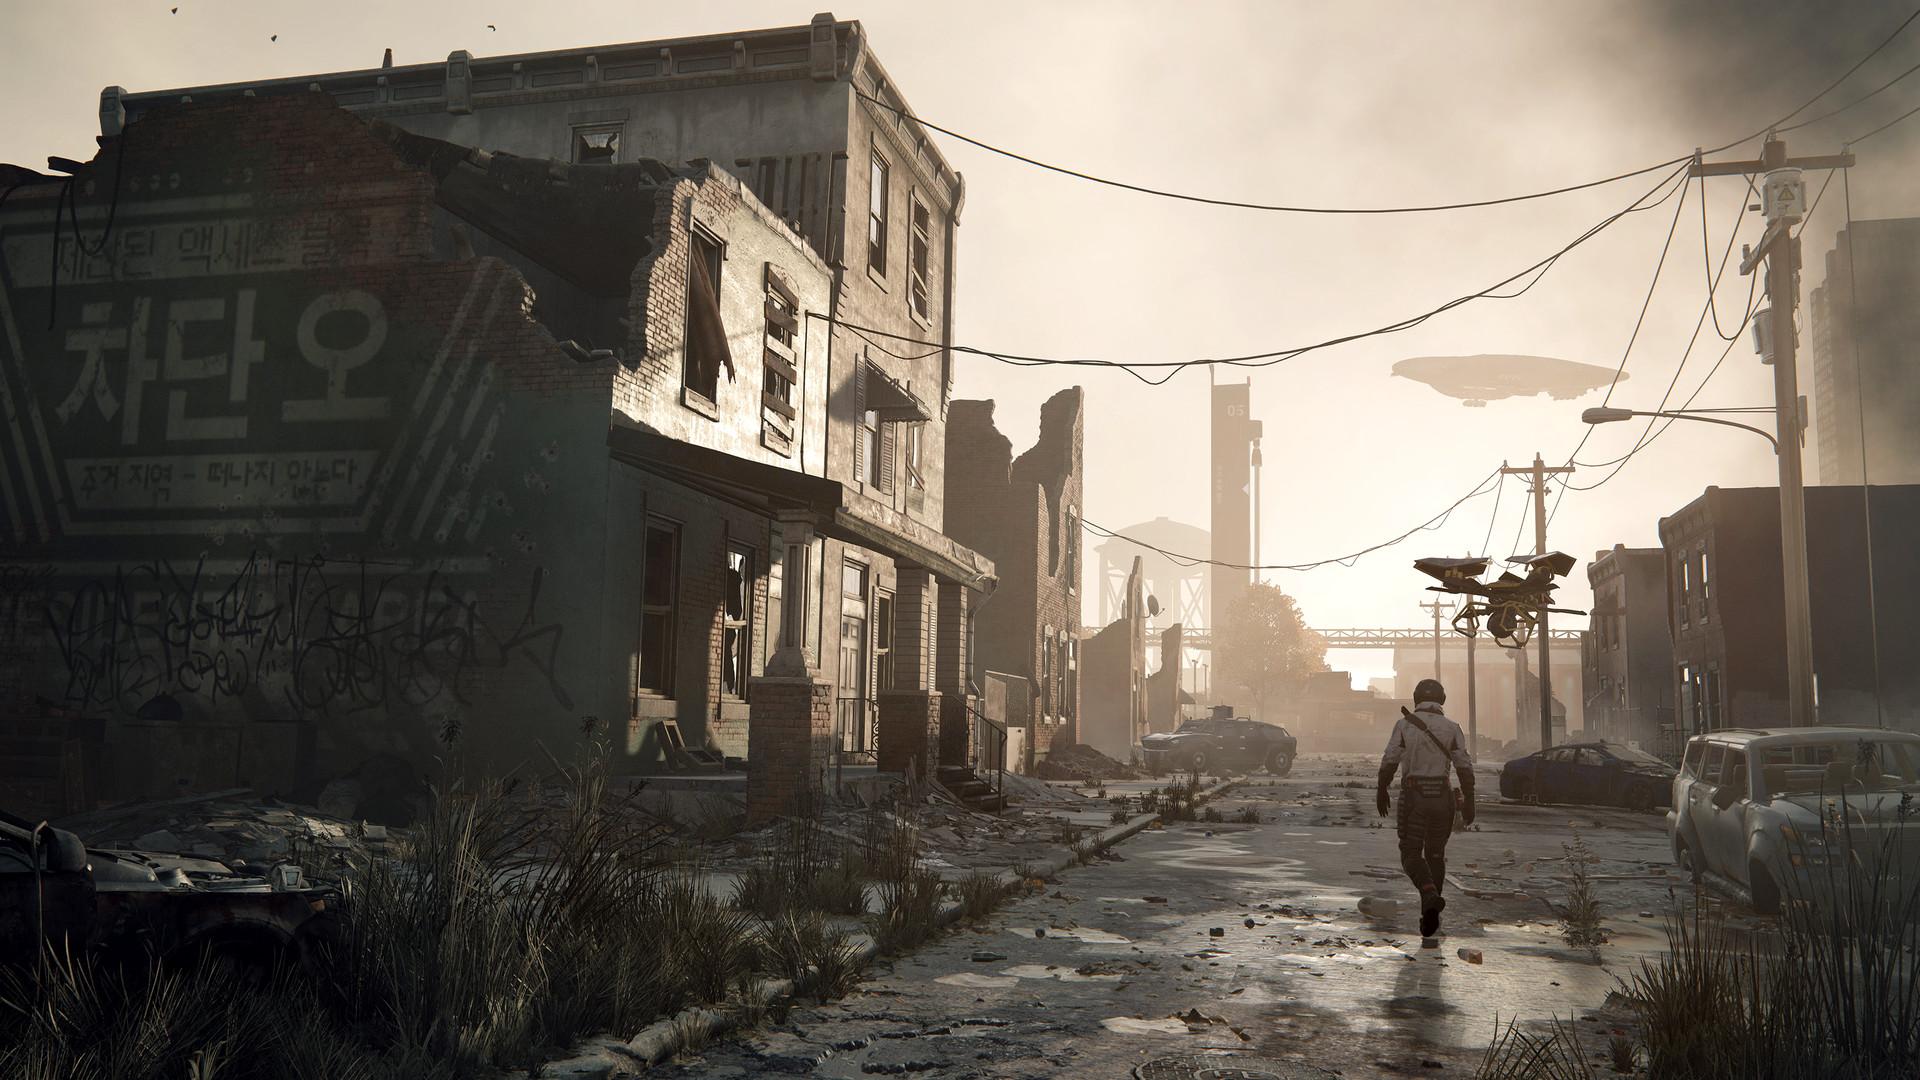 Screenshot №12 from game Homefront®: The Revolution